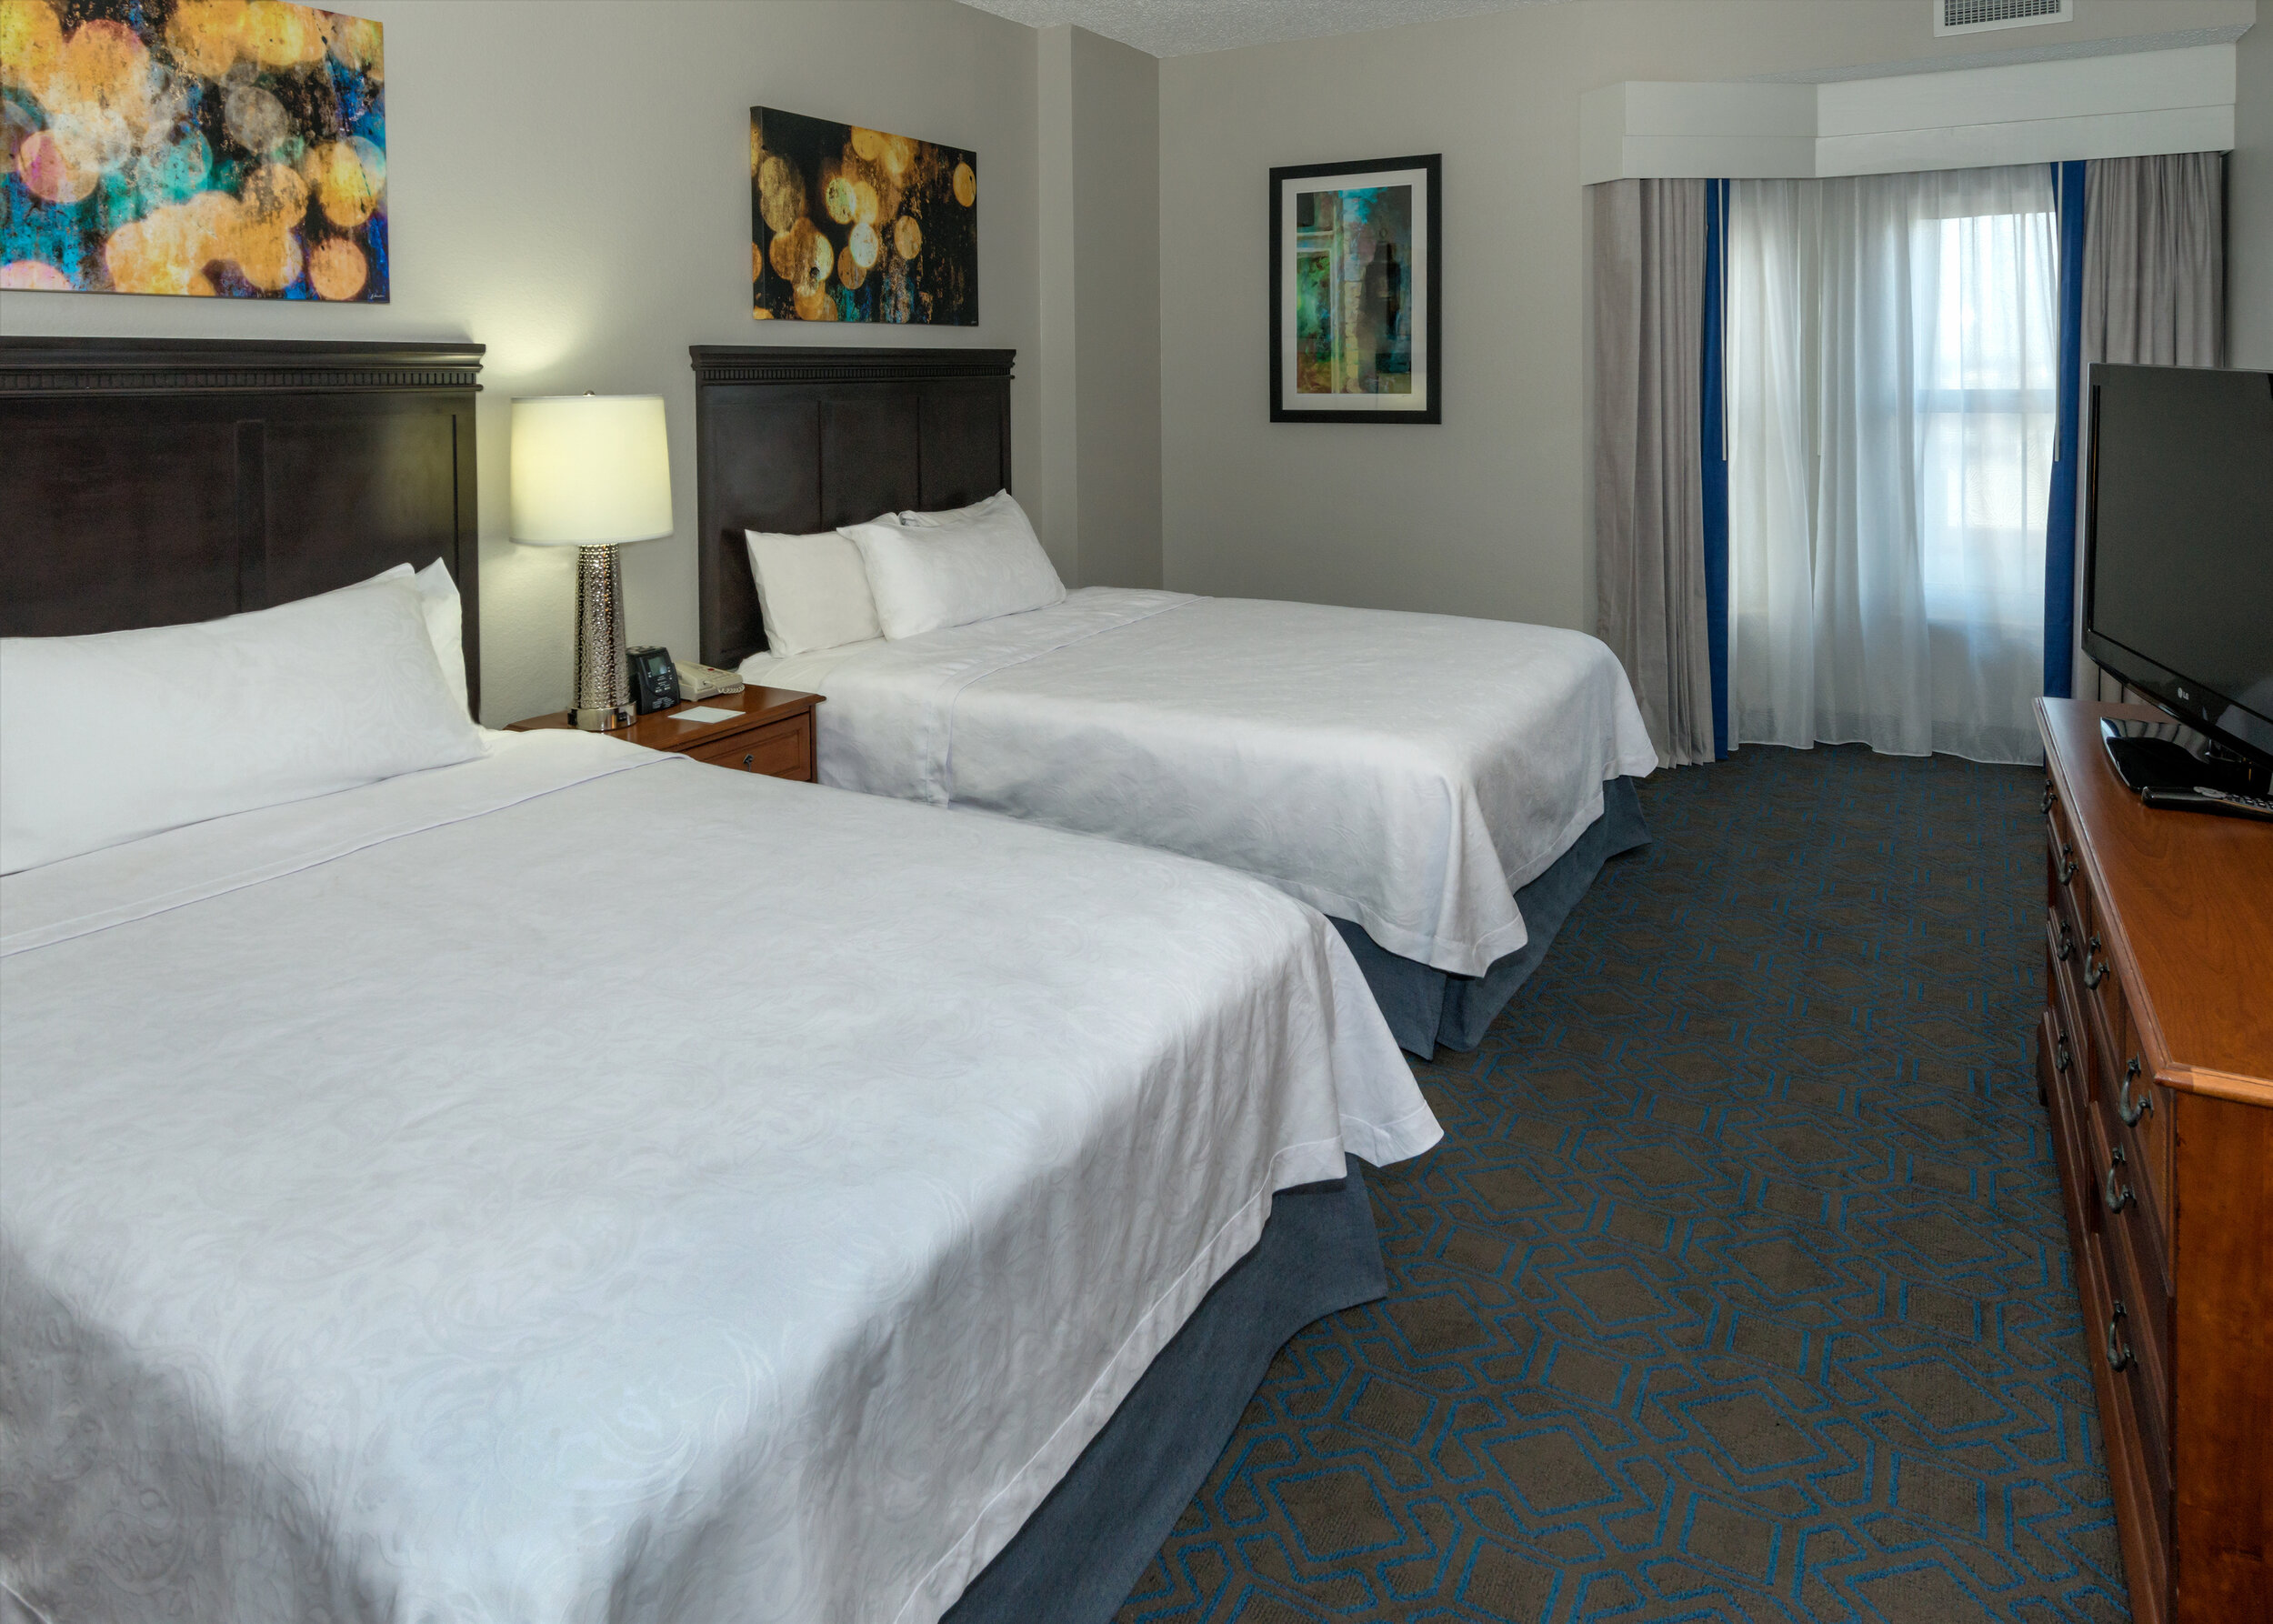 Homewood_Suites_by_Hilton_New_Orleans_Double_Queen_GuestRoom_HR.jpg